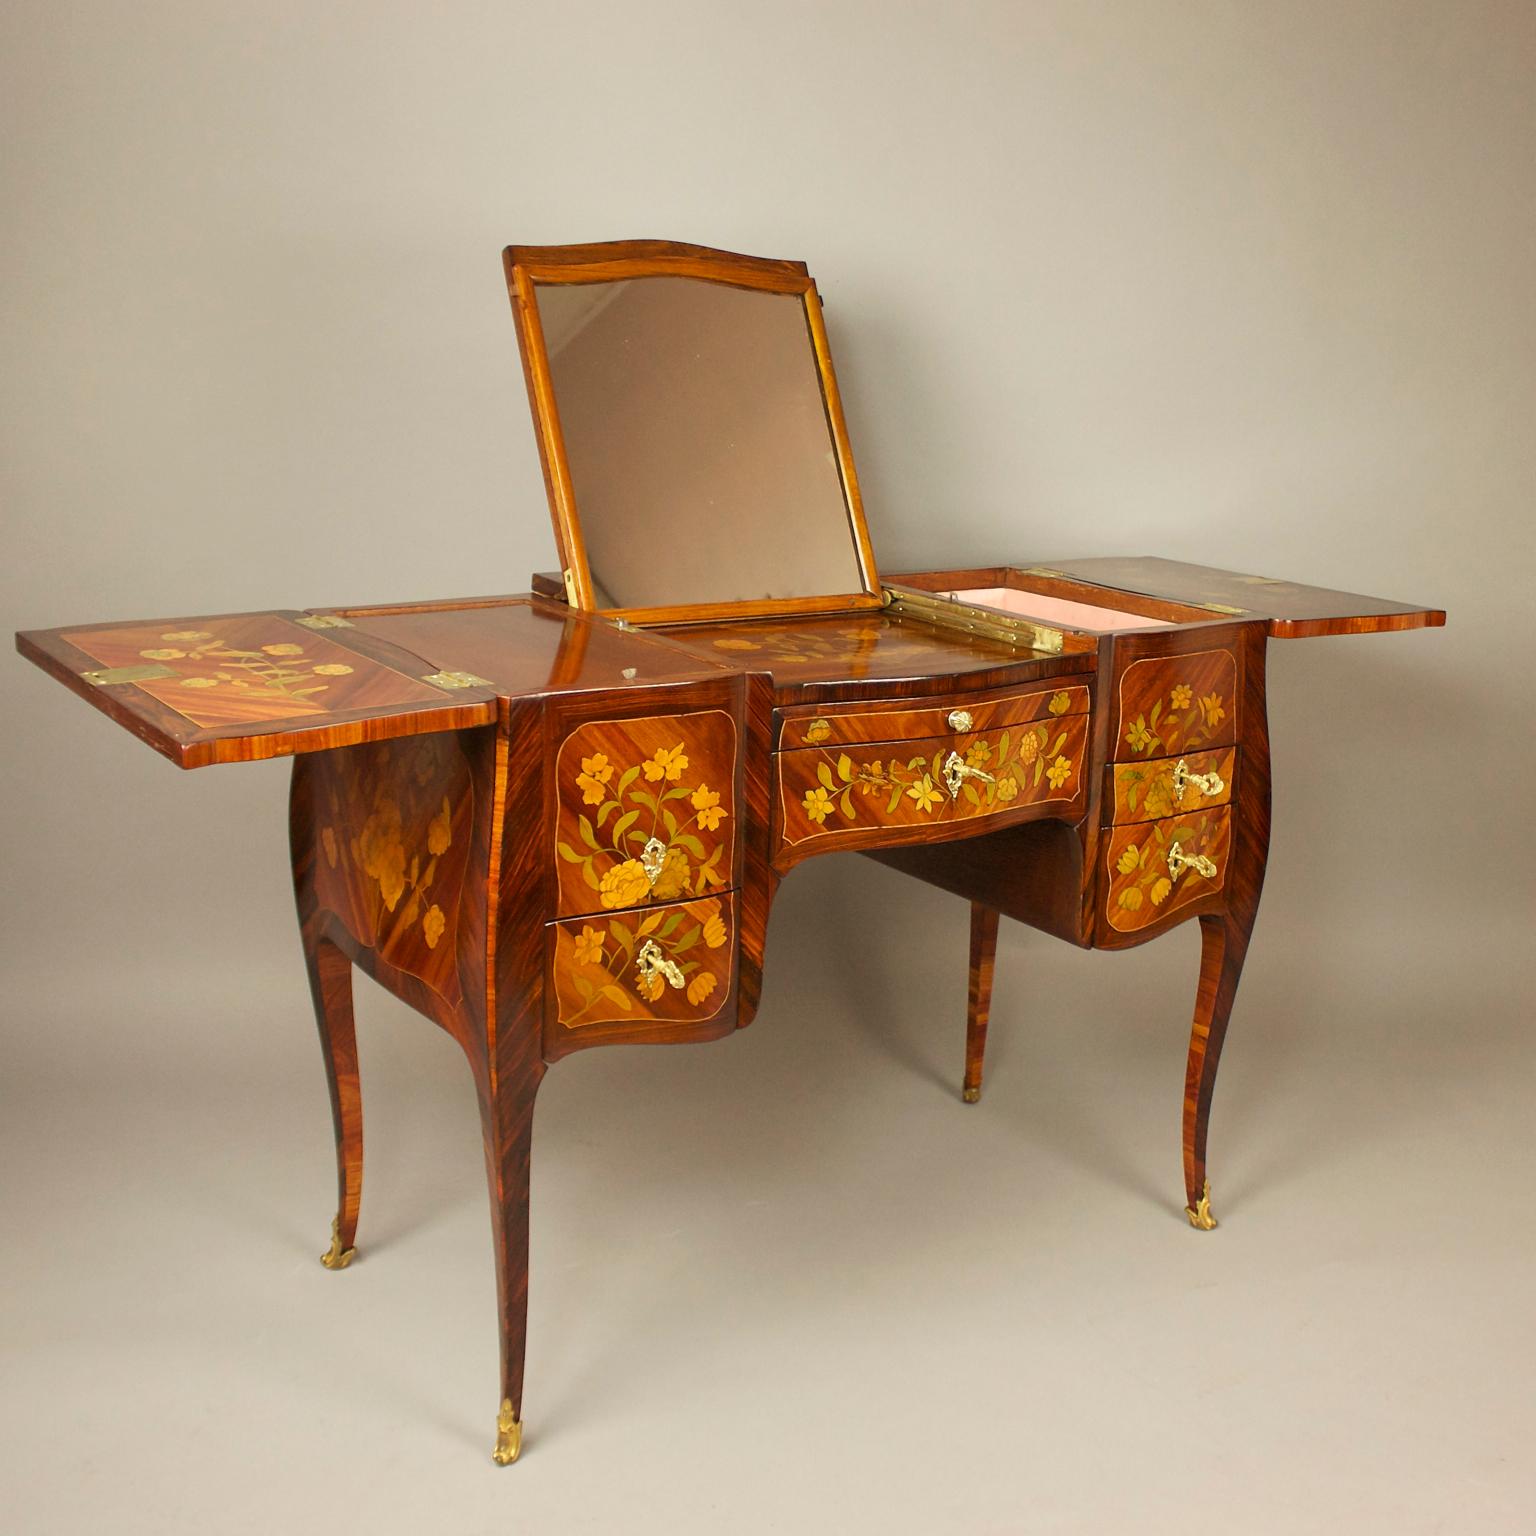 A Louis XV marquetry dressing table or 'perruquiere' attributed to Pierre Roussel (1723-1782). The table is veneered in tulipwood and other woods, forming floral marquetry panels with a the top central panel incorporating a trophy of finely inlaid